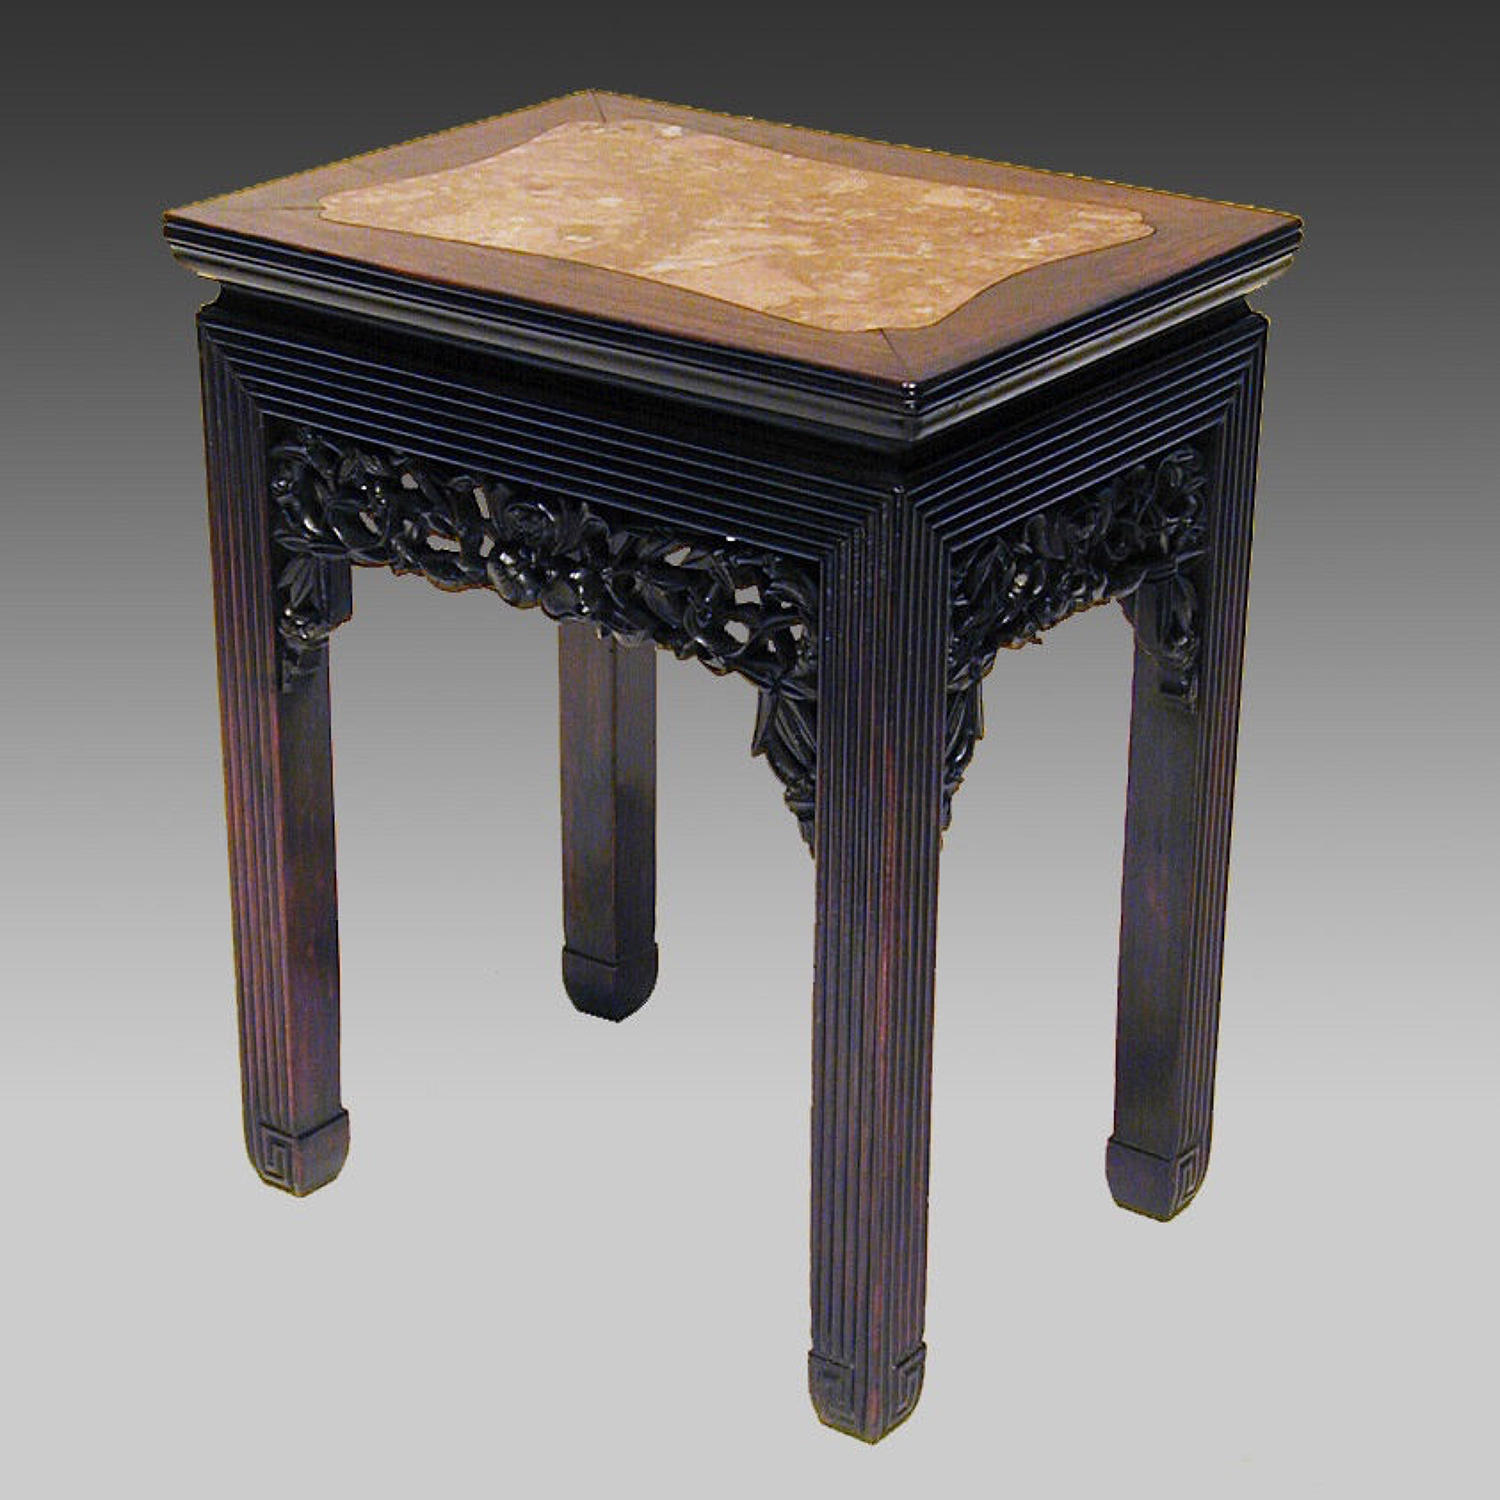 19th century Chinese hardwood centre table